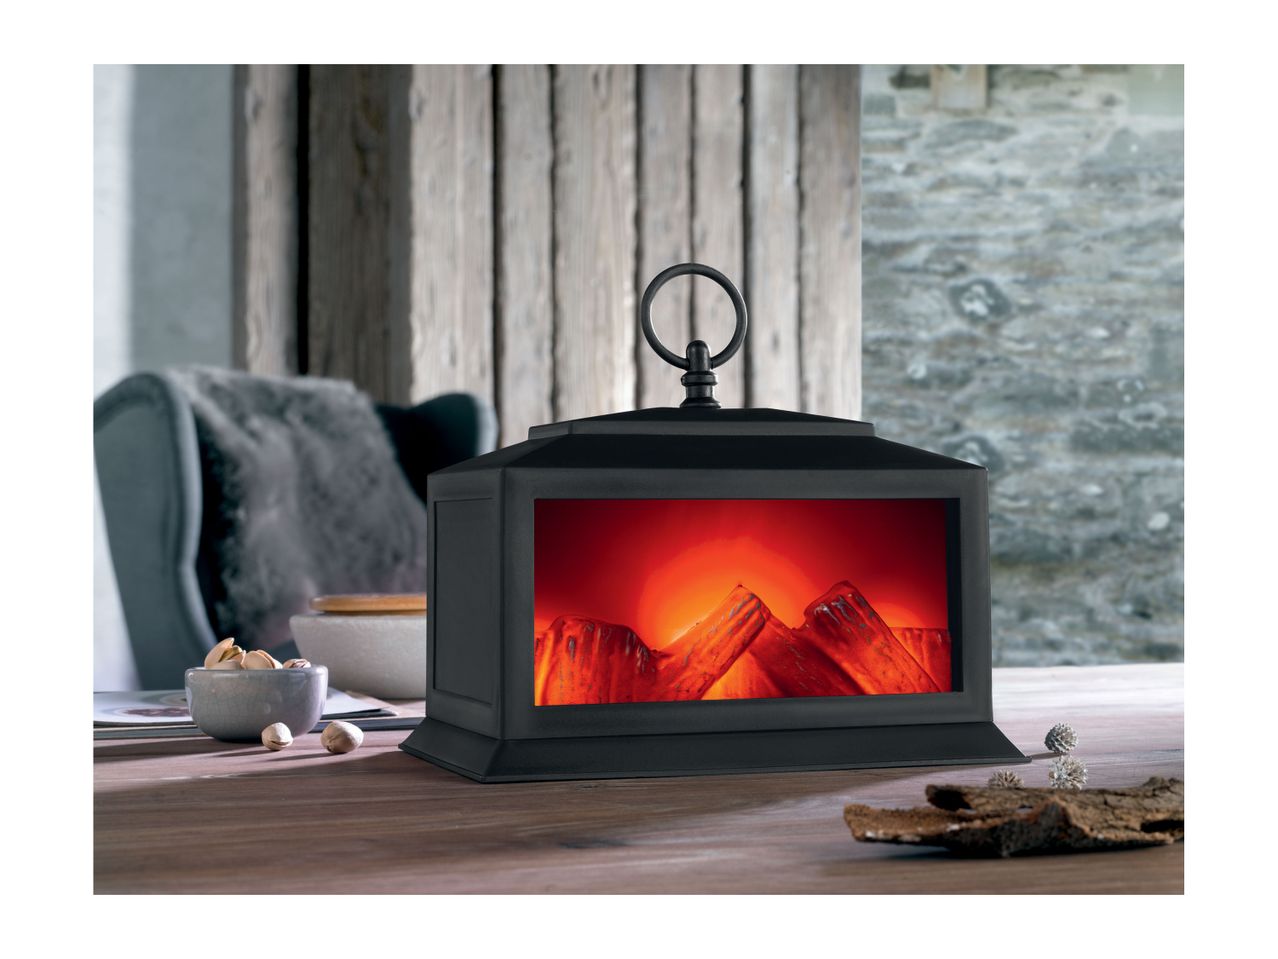 Go to full screen view: Livarno Home Battery Operated LED Fireplace Style Lantern - Image 9